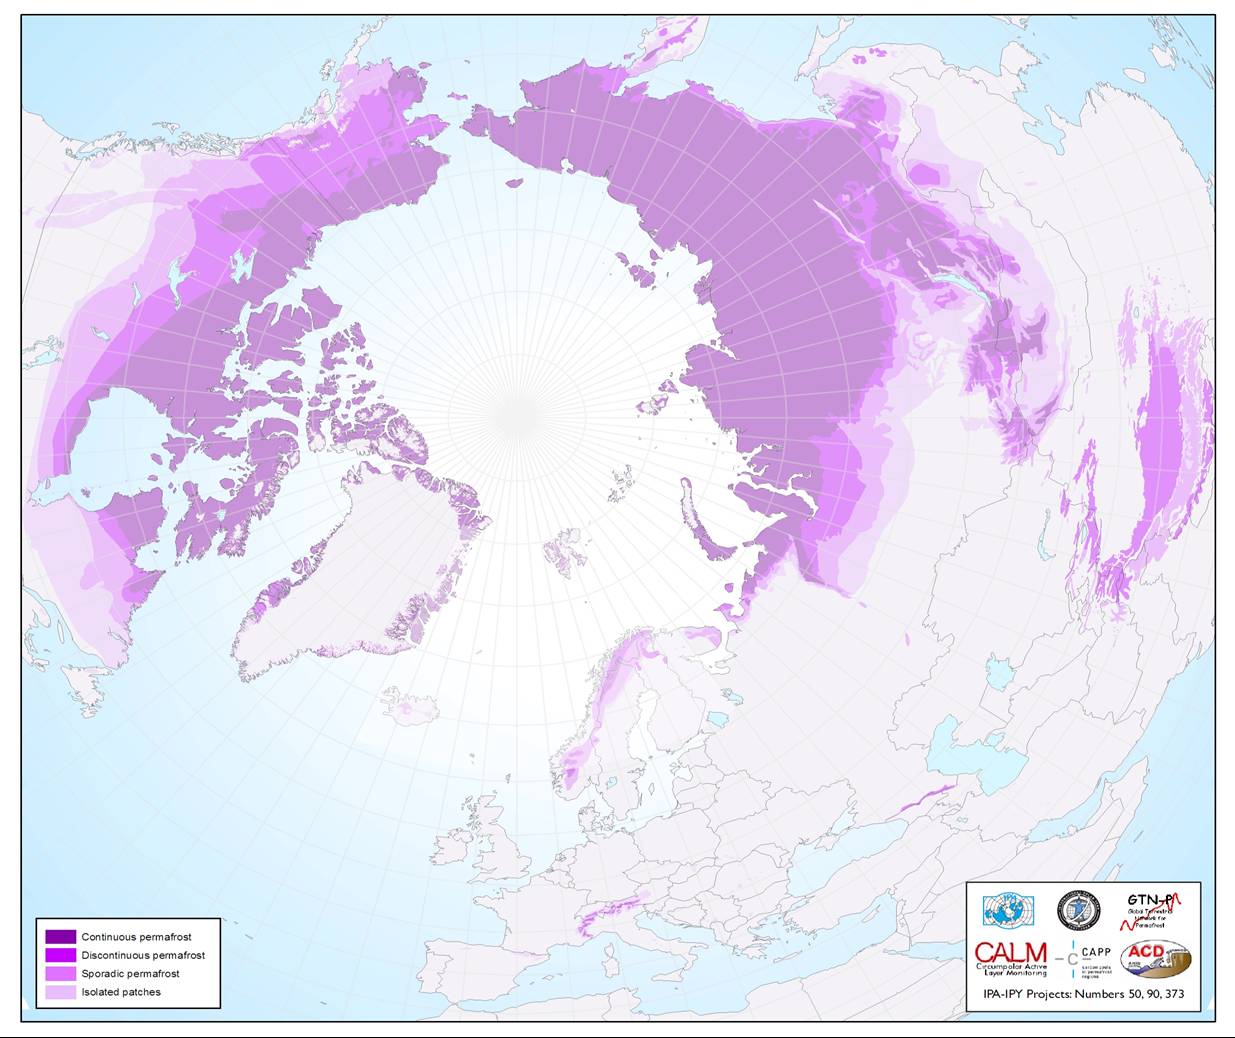 Map showing which parts of the world have permafrost